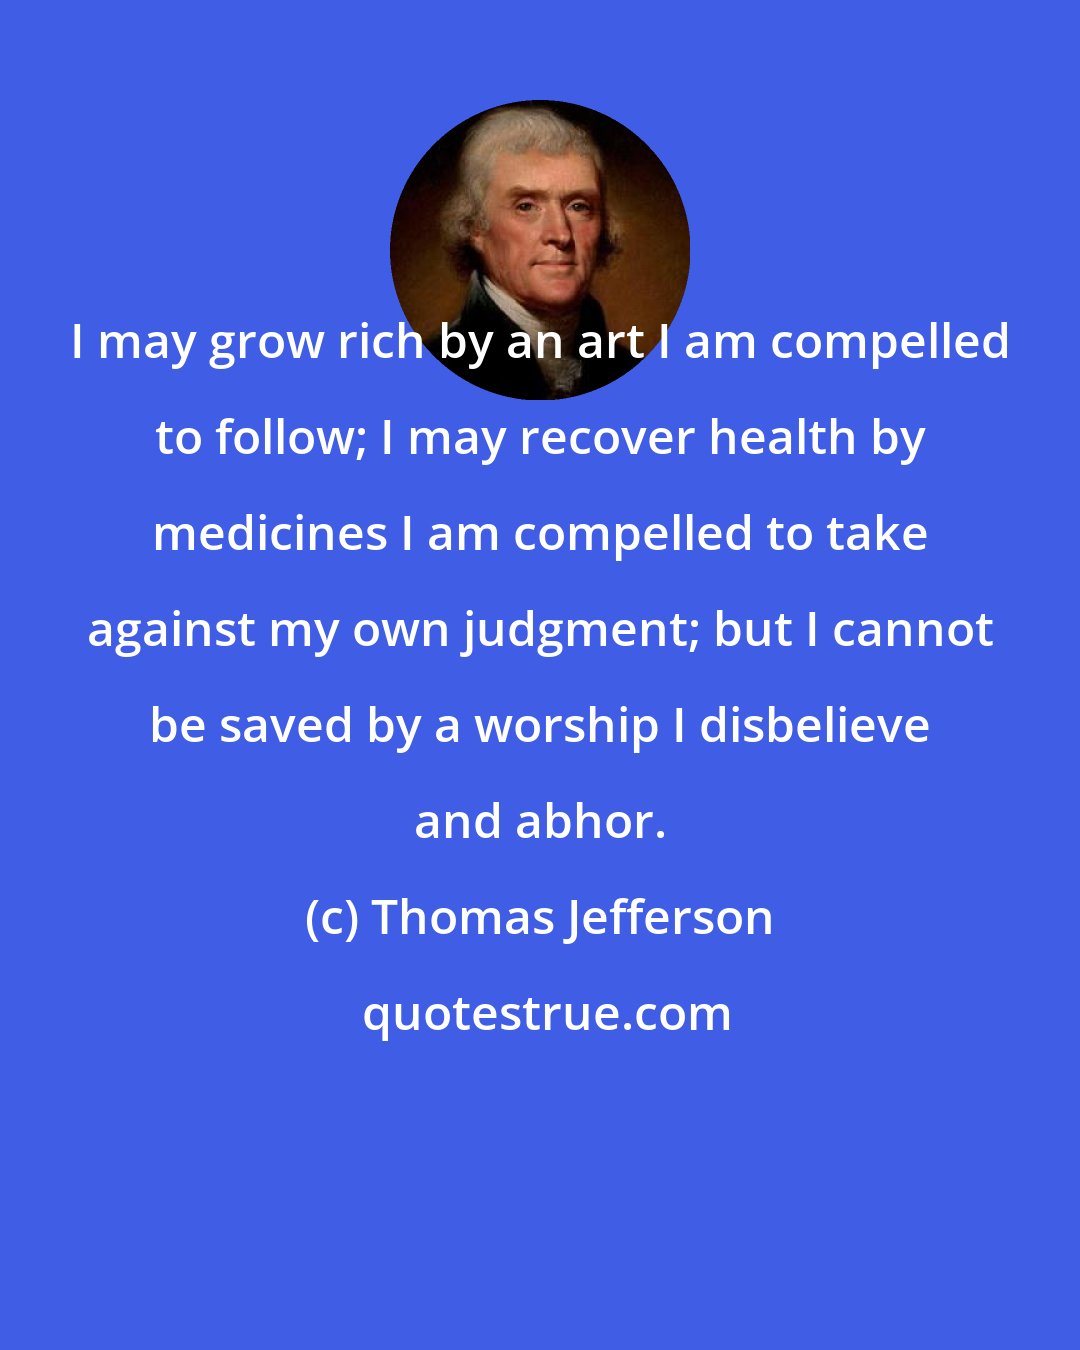 Thomas Jefferson: I may grow rich by an art I am compelled to follow; I may recover health by medicines I am compelled to take against my own judgment; but I cannot be saved by a worship I disbelieve and abhor.